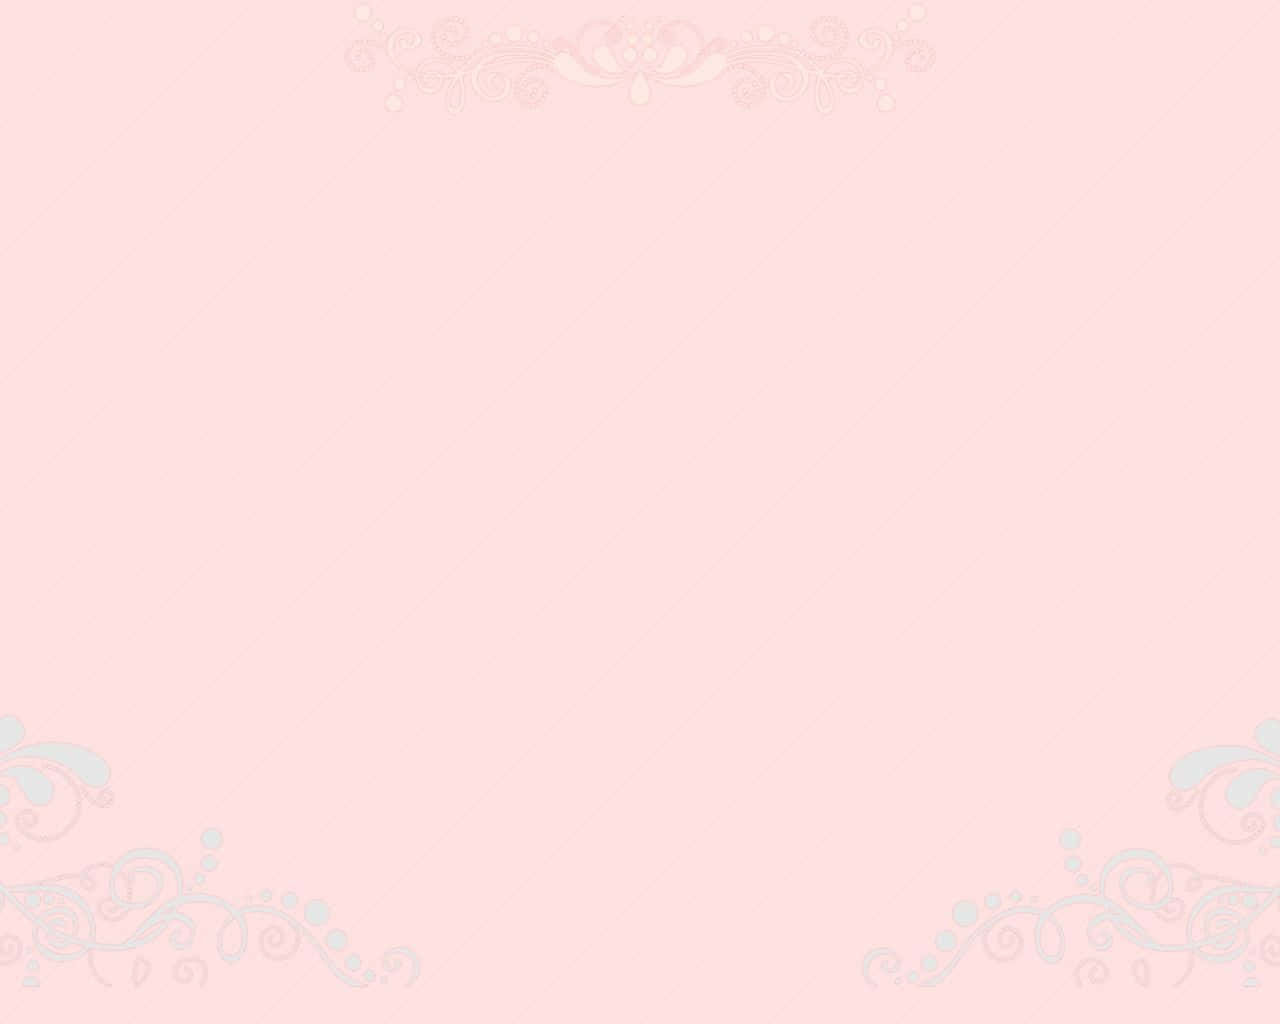 A colorful and cute pink dotted background